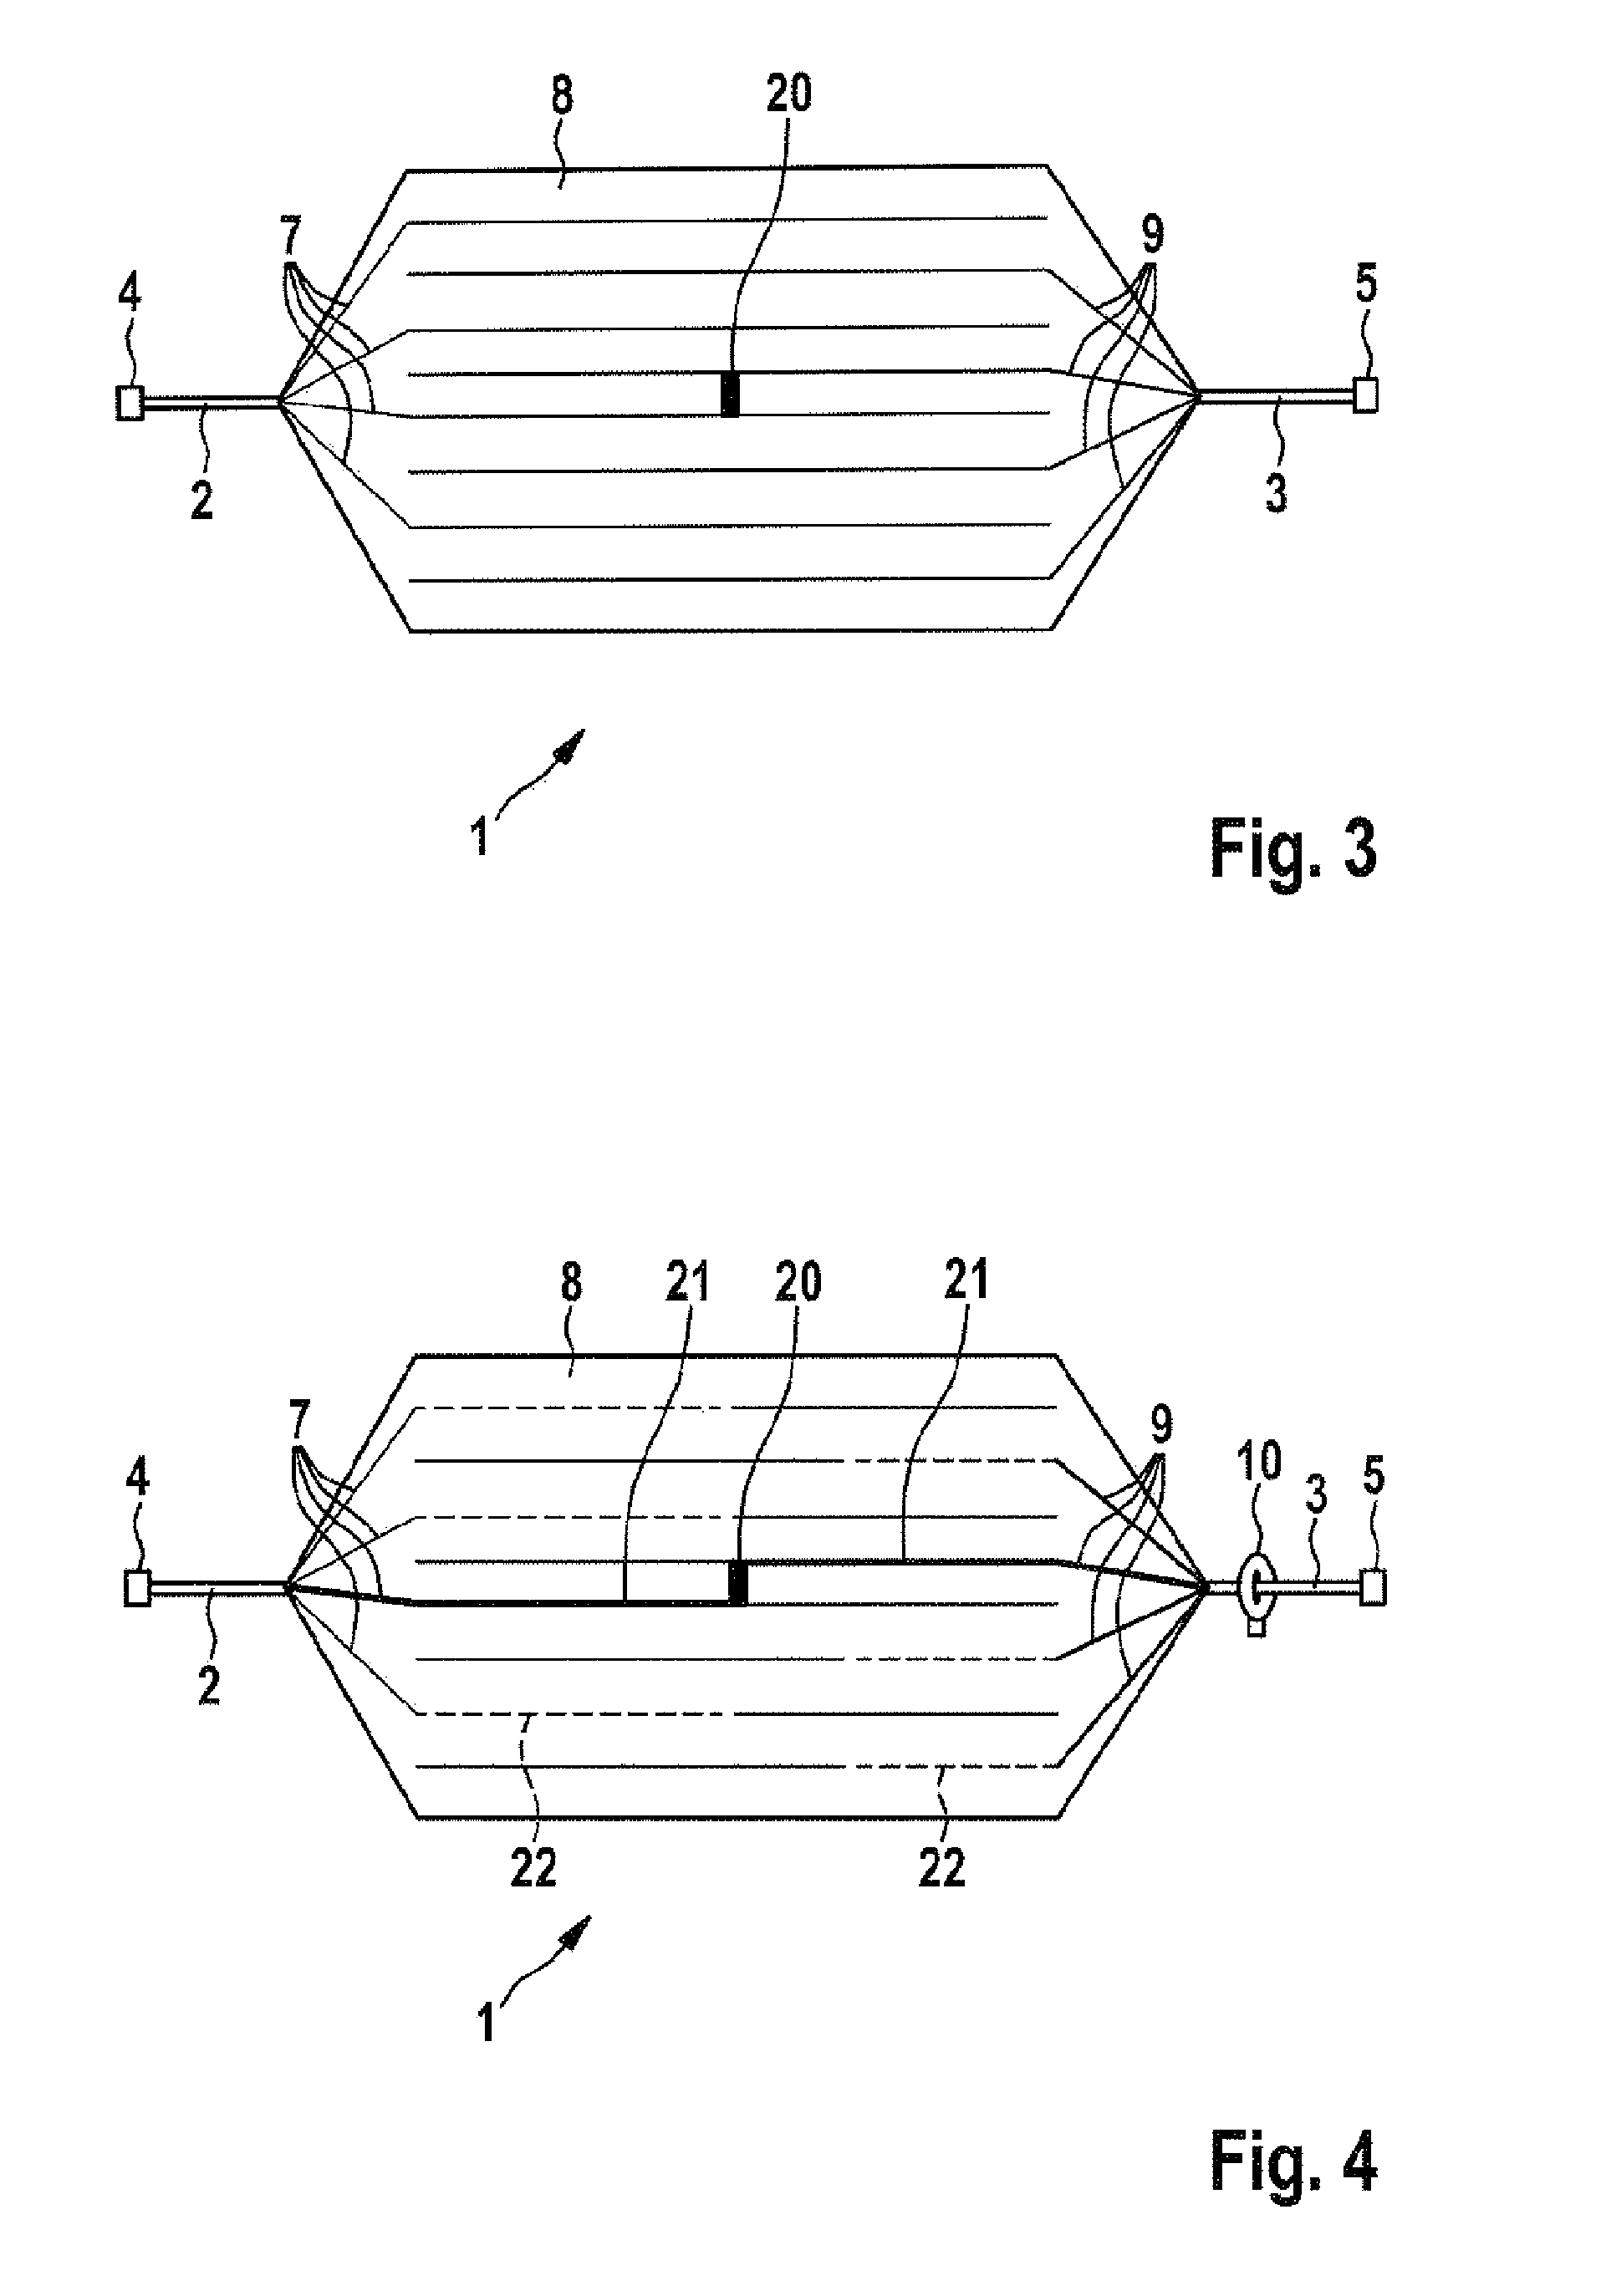 Short-circuit detection apparatus for detecting short circuits of a battery cell and method for short-circuit detection